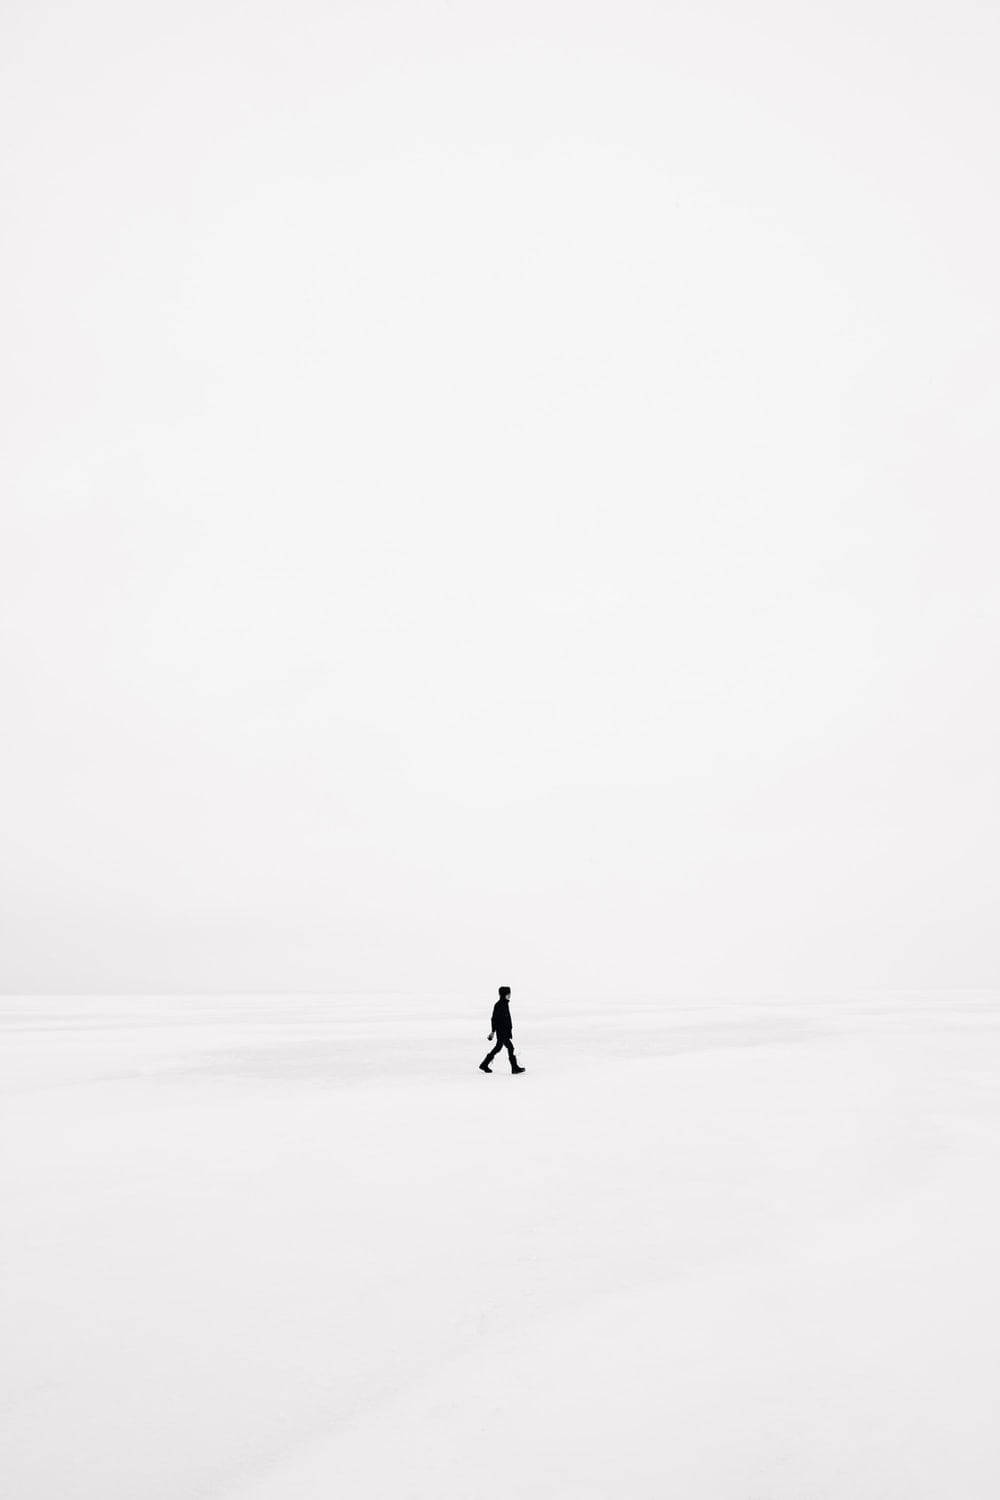 Walking Across Cool White Background